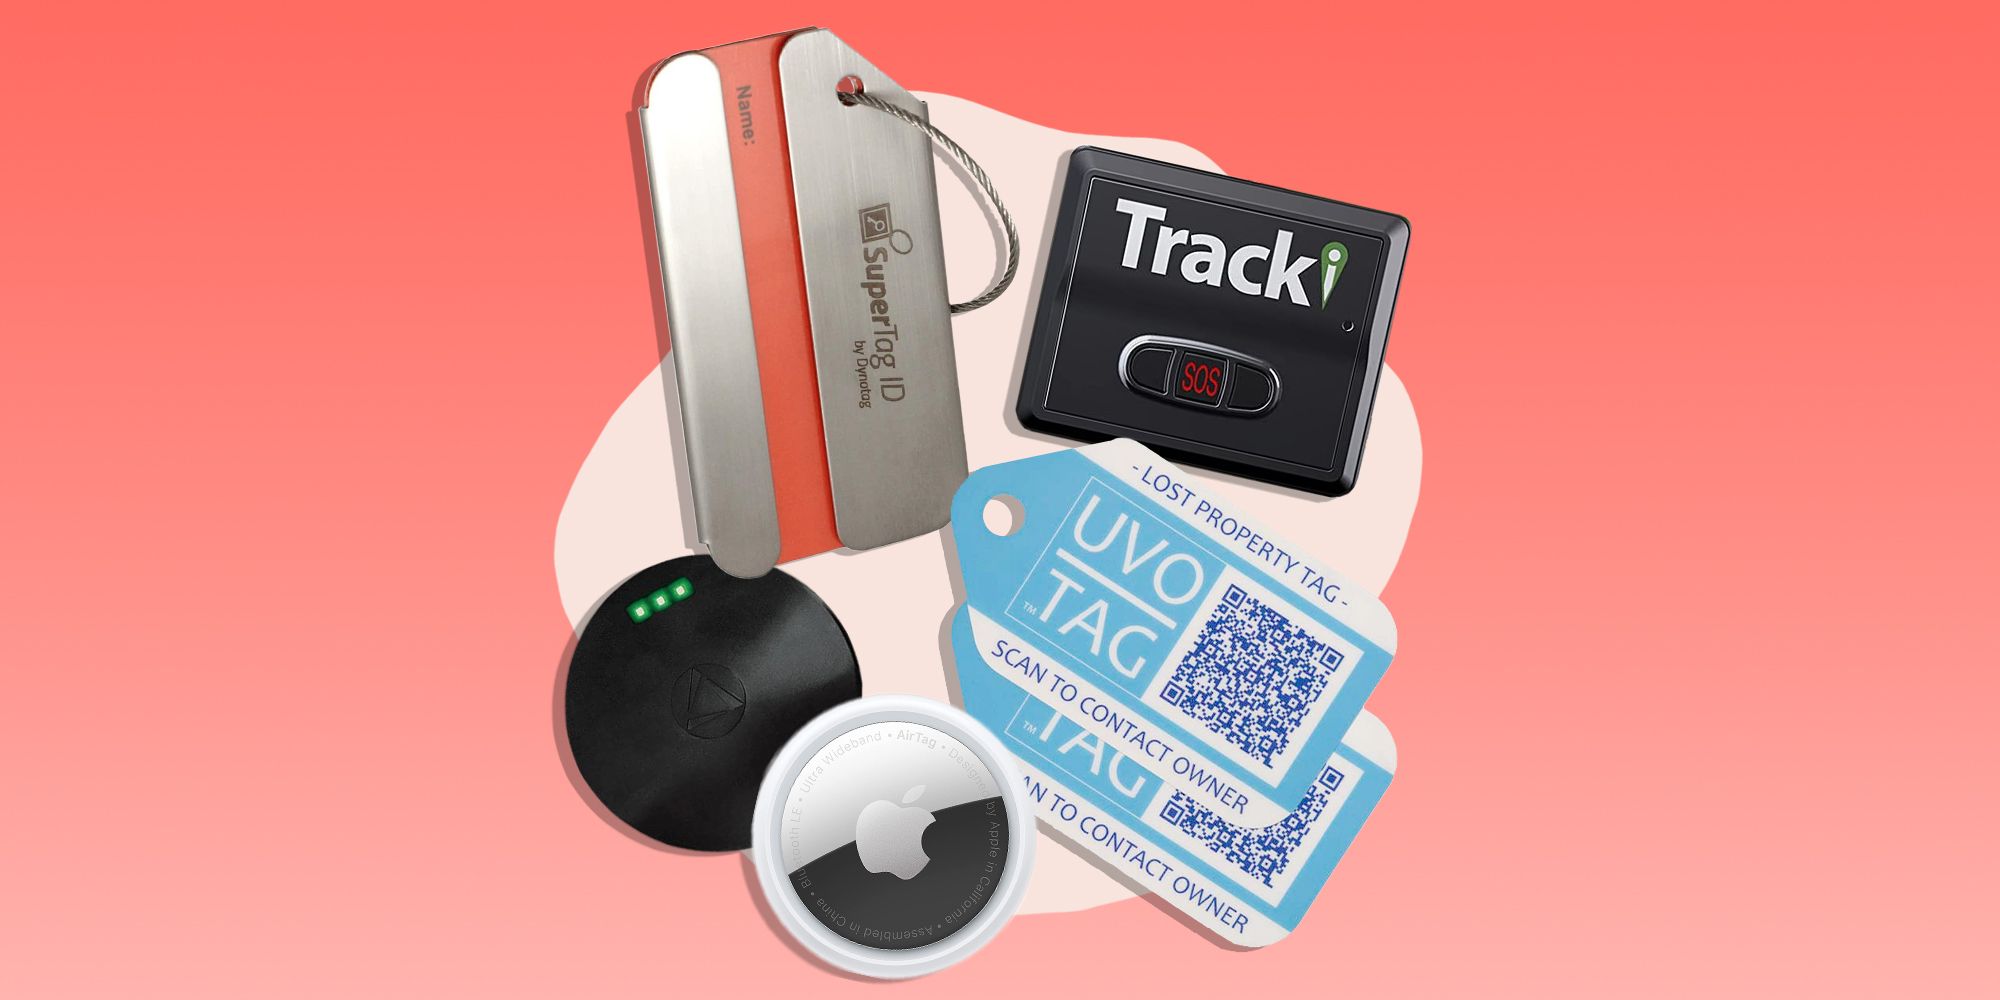 6 Best Luggage Trackers of 2022 - Top Rated Luggage Trackers